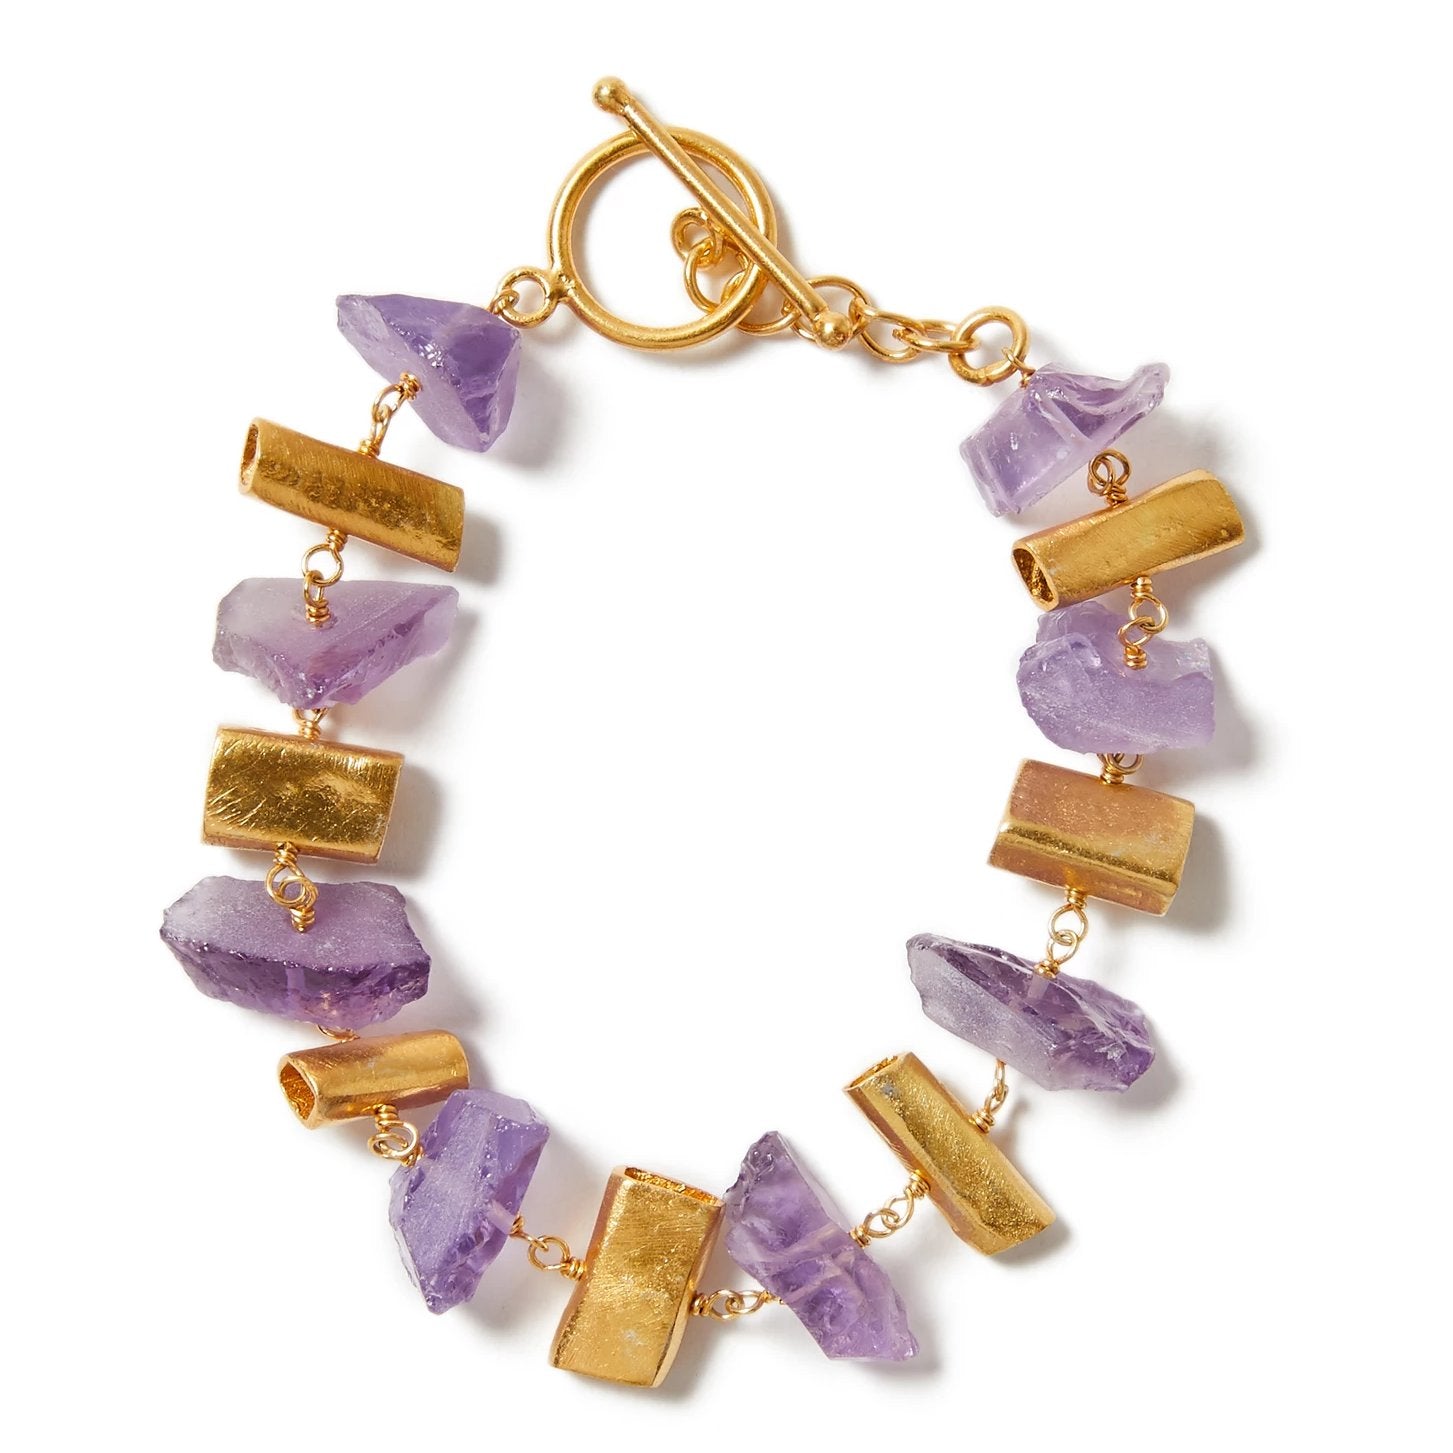 Crystal Natural Amethyst Crushed Stone Bracelet is best sold and its  accessories keep color  Shopee Philippines